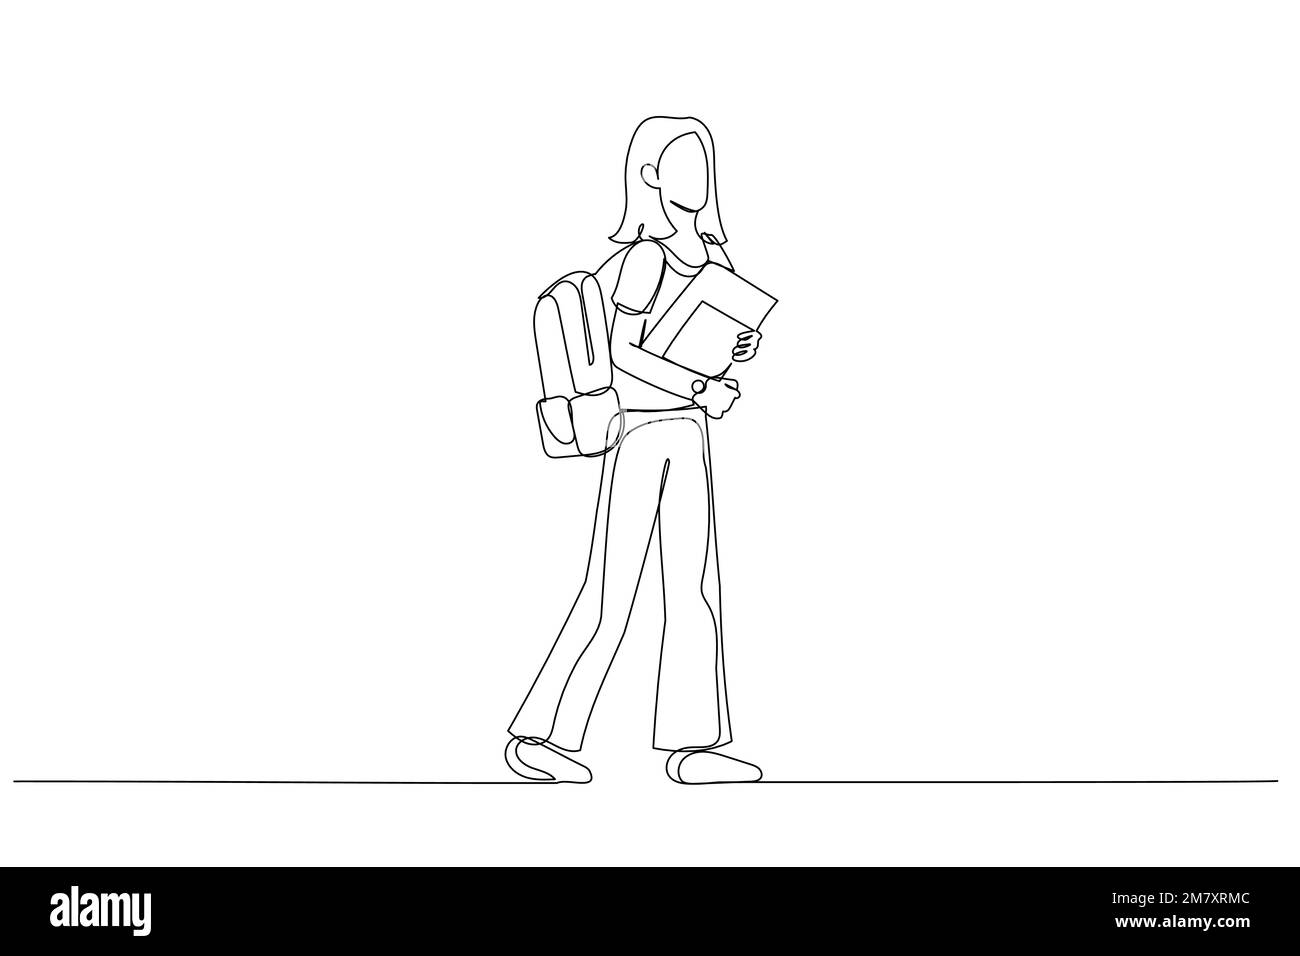 https://c8.alamy.com/comp/2M7XRMC/drawing-of-full-body-side-view-student-girl-hold-backpack-books-walk-single-continuous-line-art-style-2M7XRMC.jpg